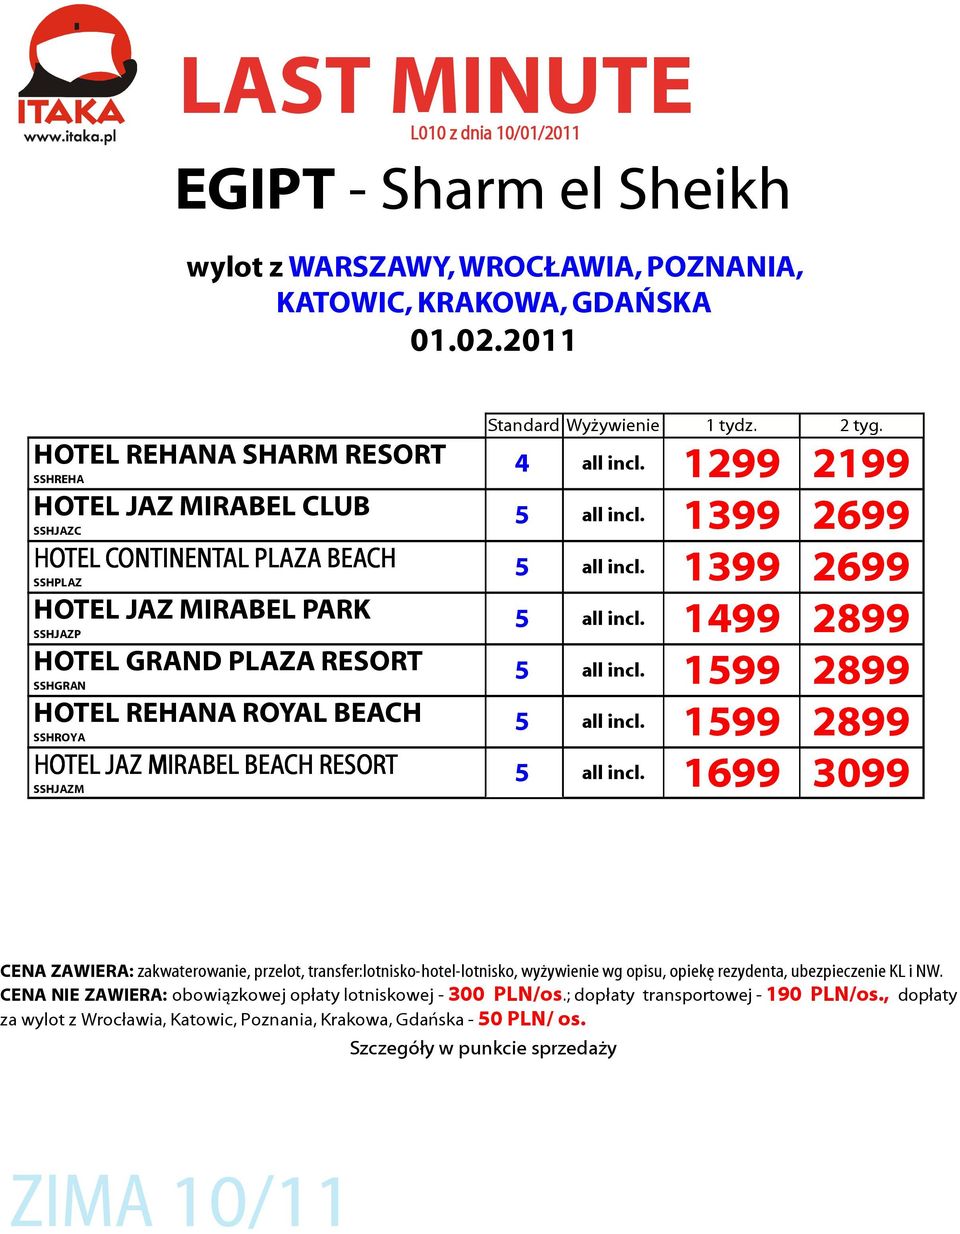 1399 2699 5 all incl. 1499 2899 HOTEL GRAND PLAZA RESORT 5 all incl.